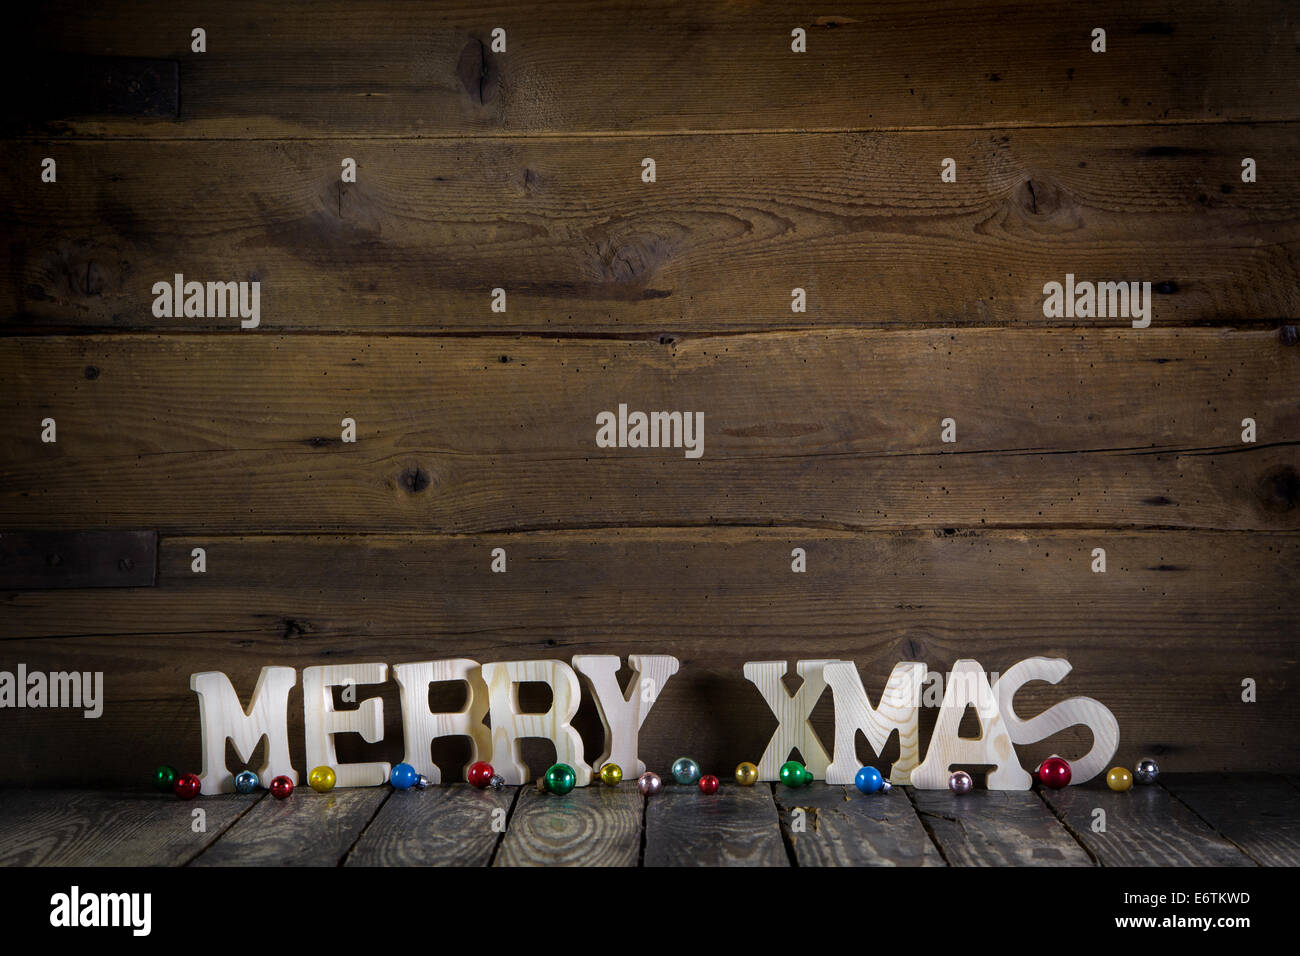 Merry christmas text on wooden old rustic background. Stock Photo